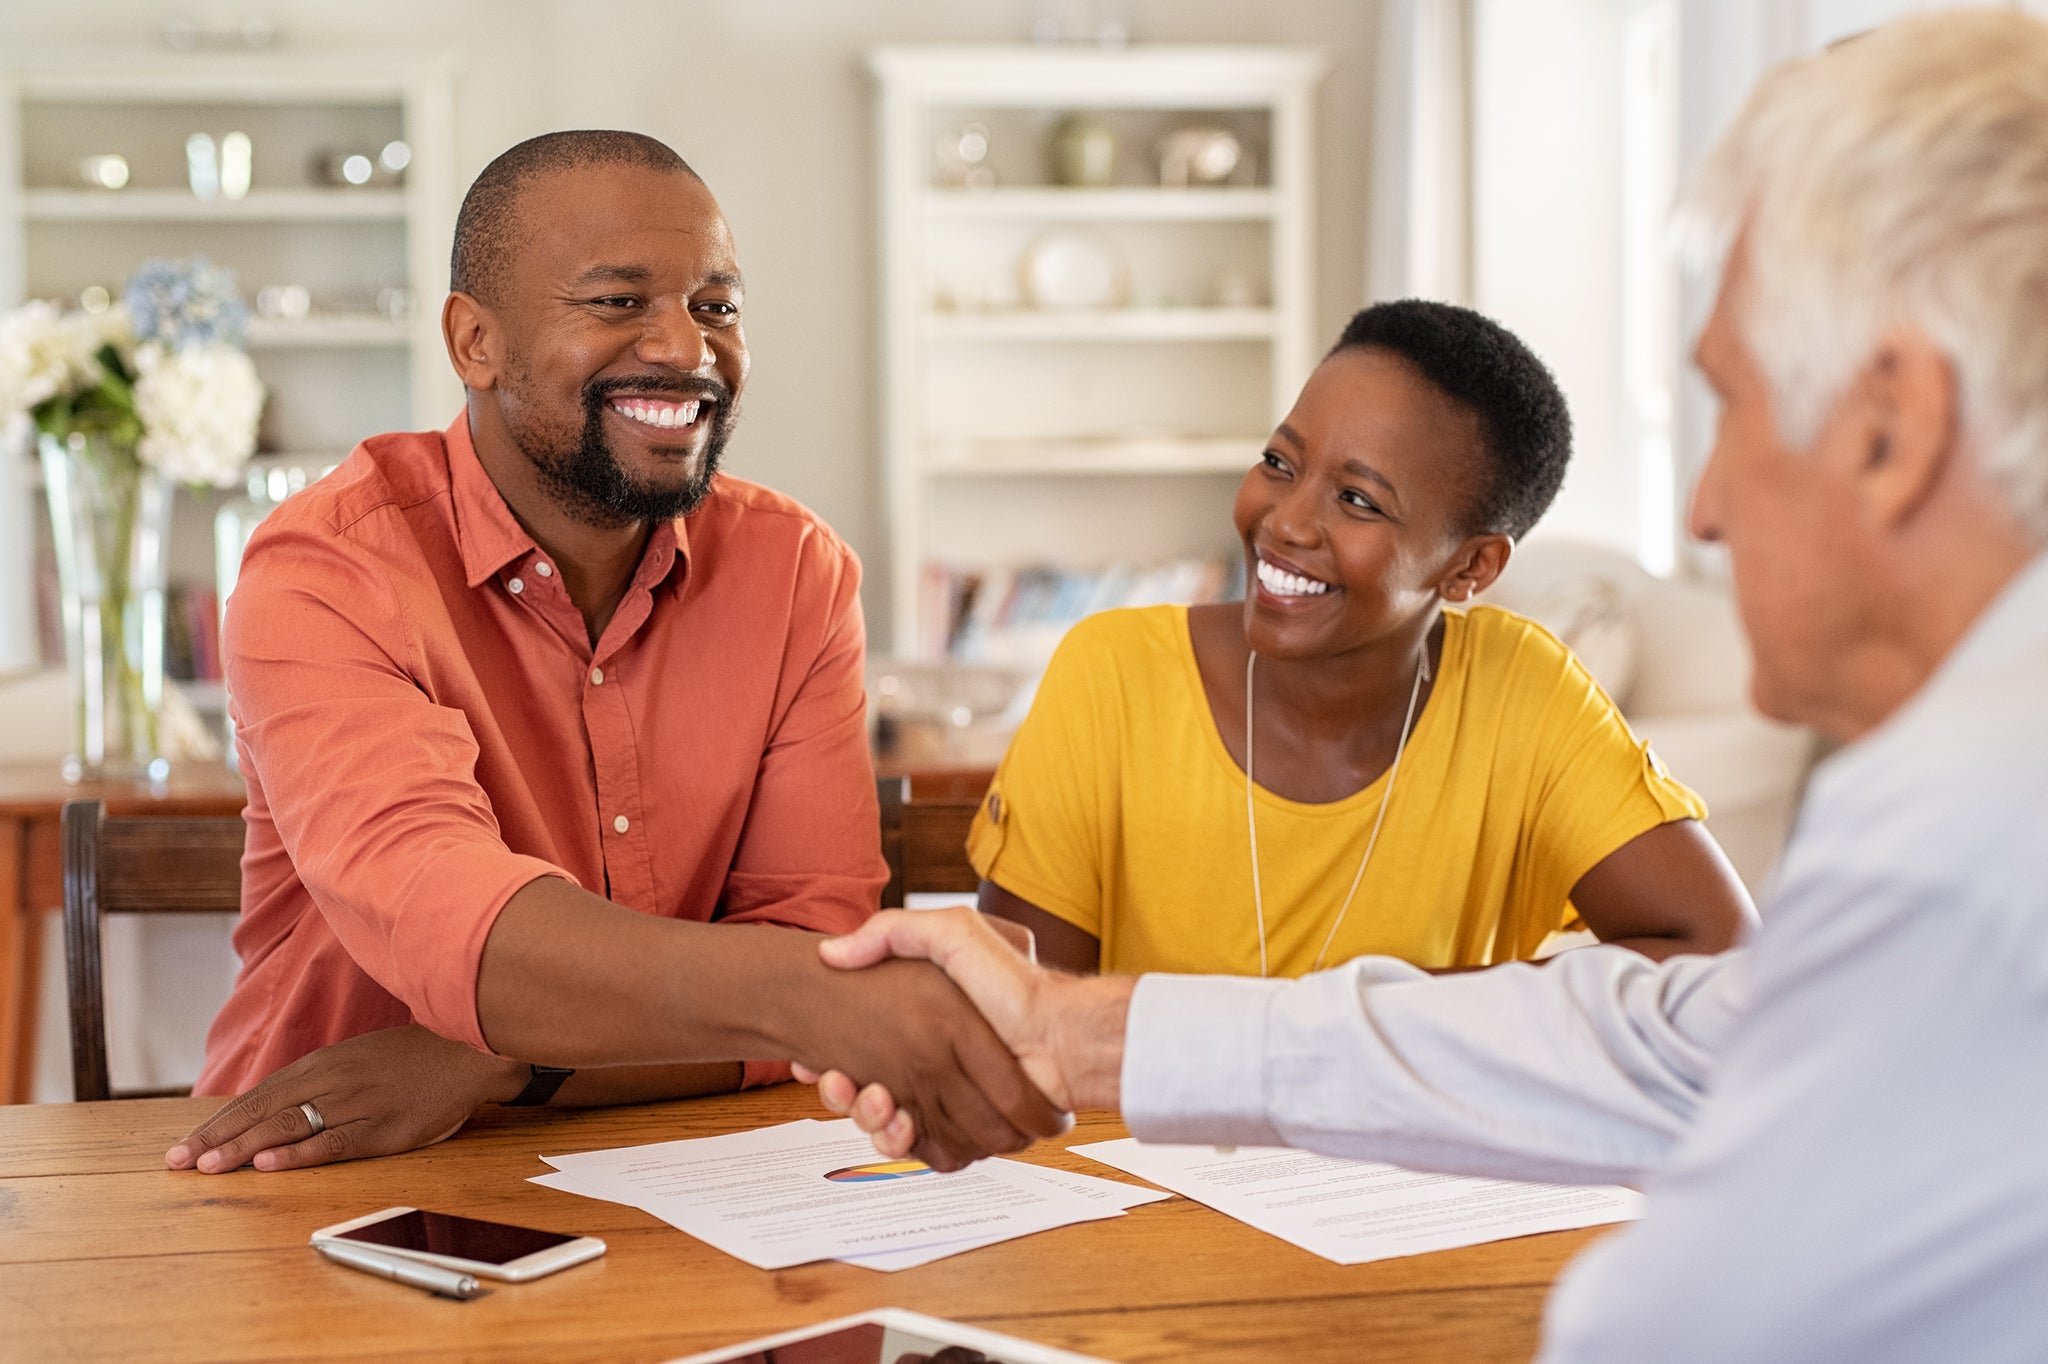 Mature black husband shaking hands with senior agent on taking loan. Happy african couple sealing with handshake a contract with financial advisor for investment. Man making sale purchase deal concluding with a handshake with estate agent.